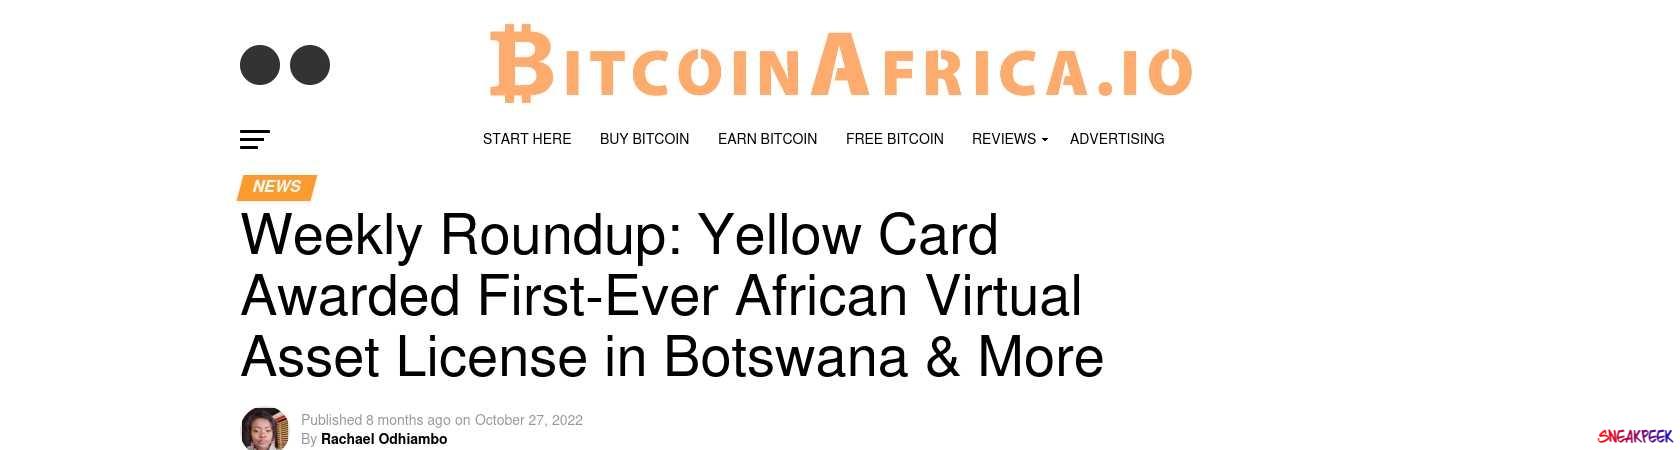 Read the full Article:  ⭲ Weekly Roundup: Yellow Card Awarded First-Ever African Virtual Asset License in Botswana & More